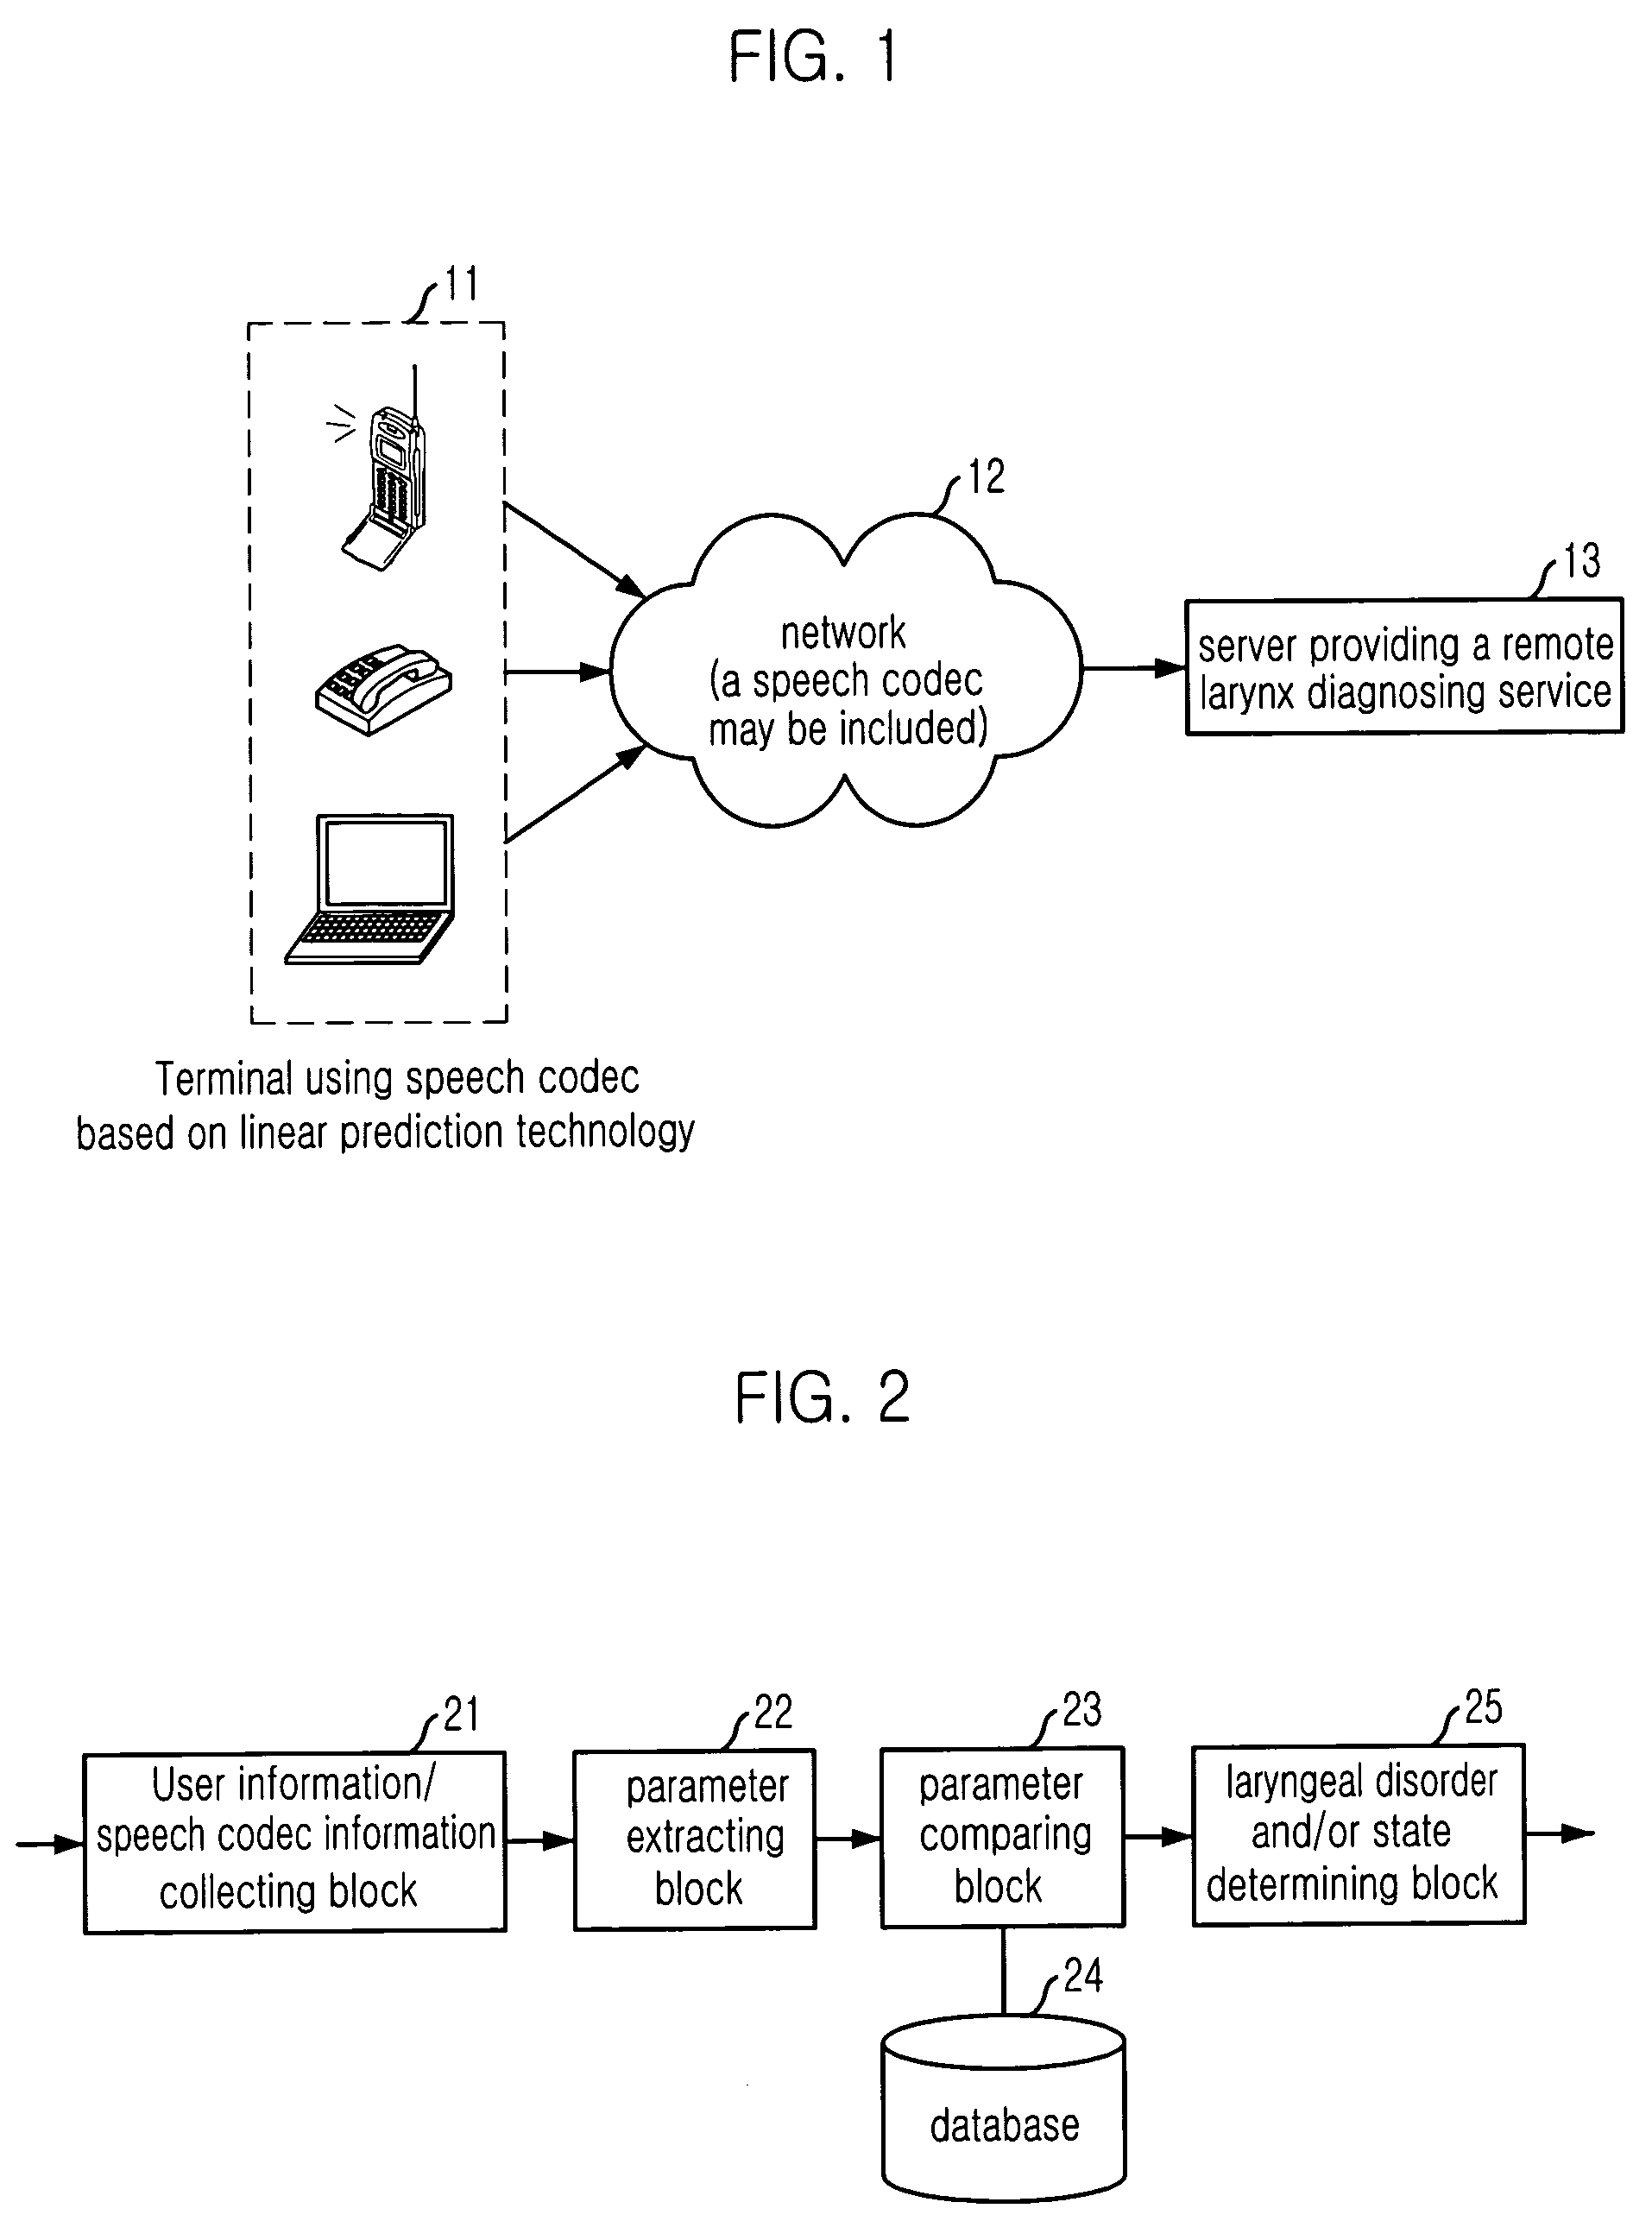 Apparatus and method for remotely diagnosing laryngeal disorder/laryngeal state using speech codec